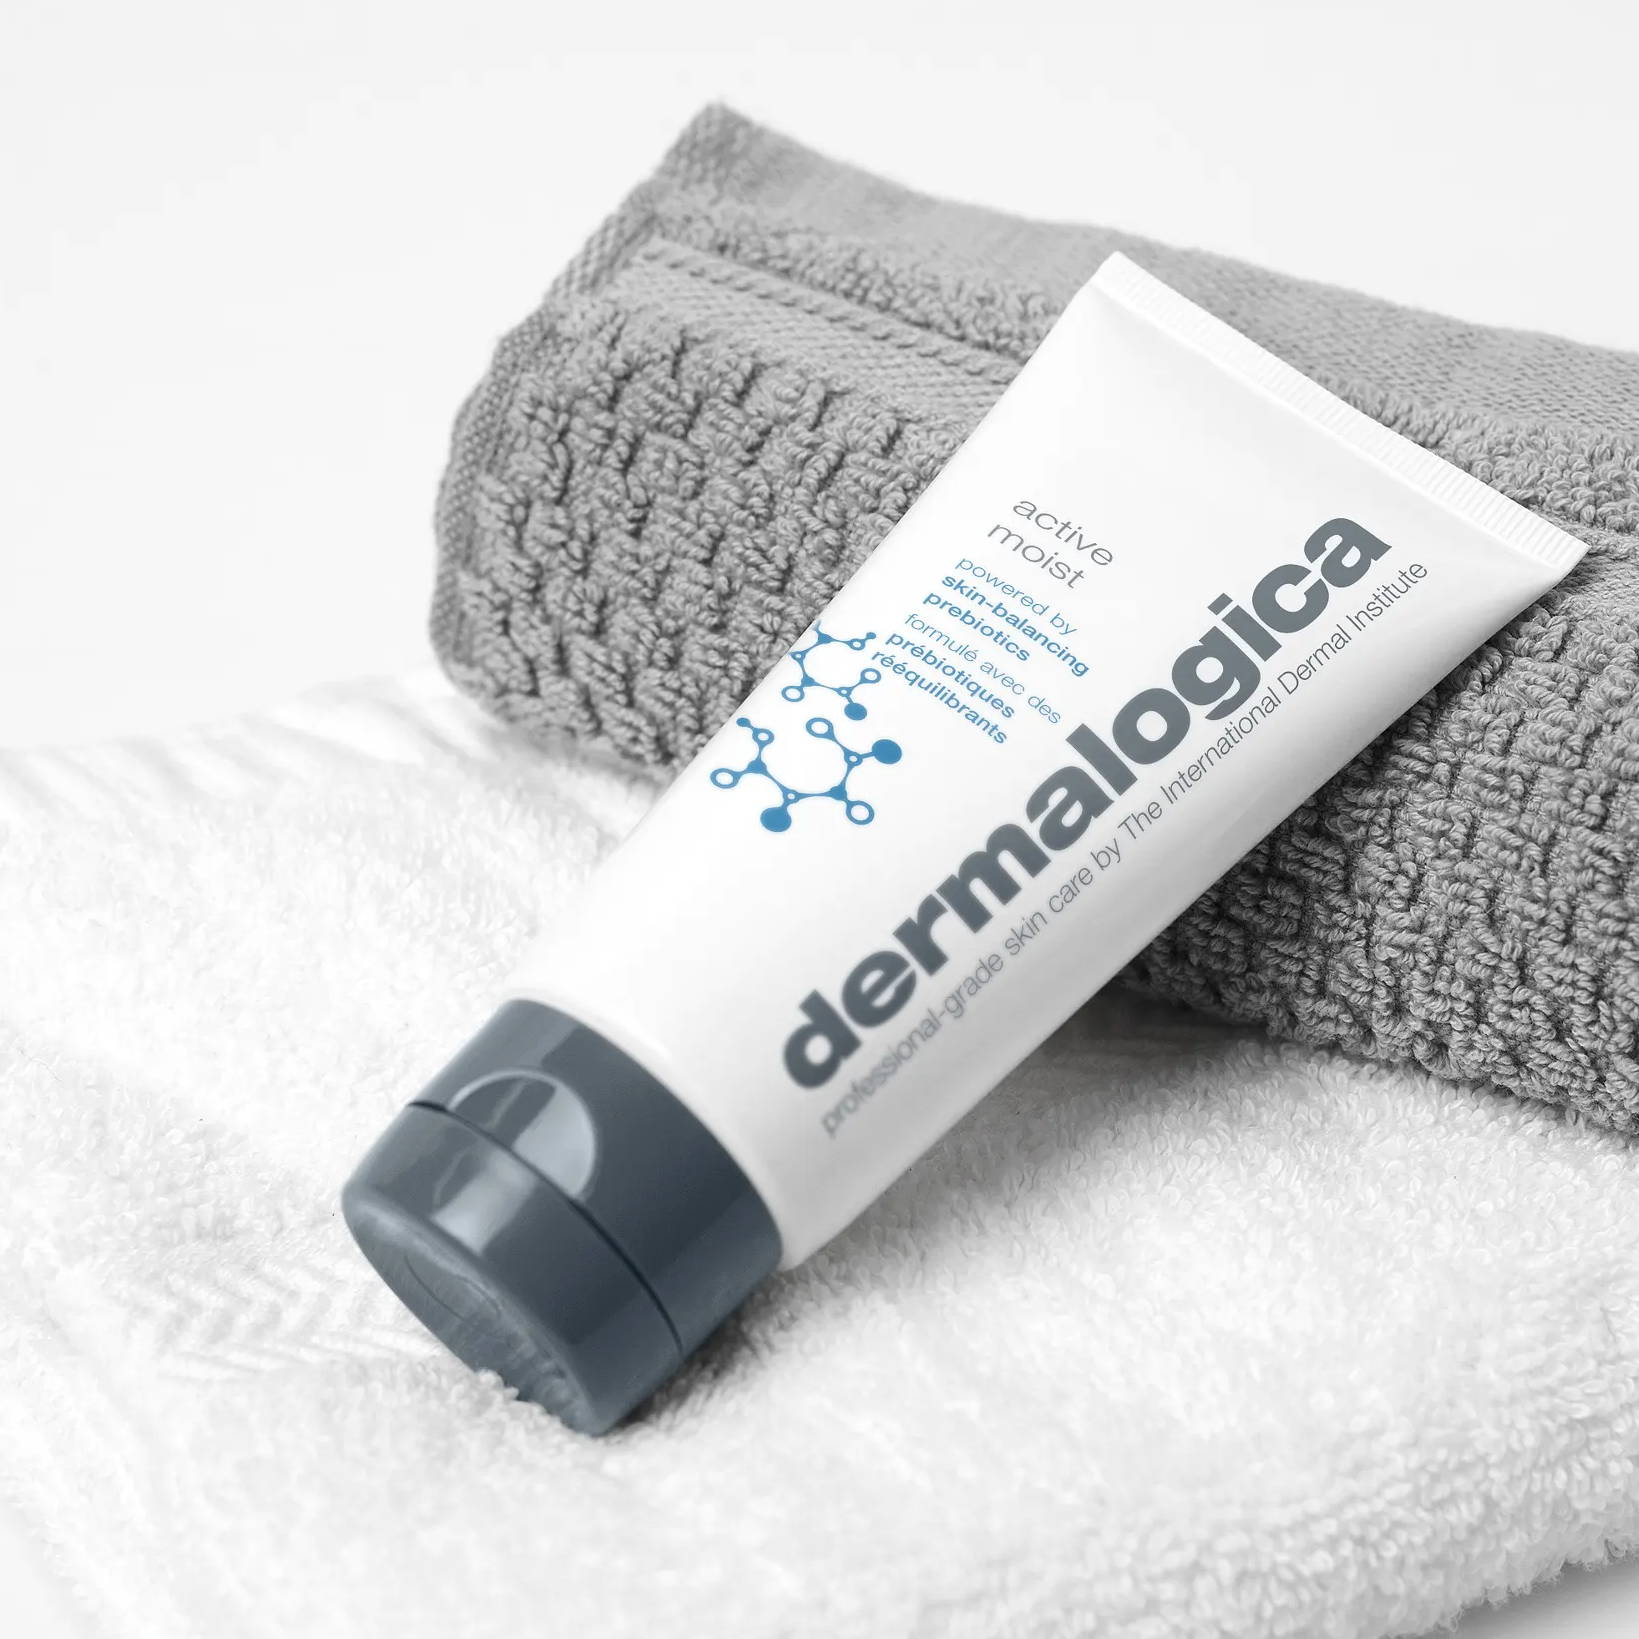 Dermalogica Active Moist Product on Towel